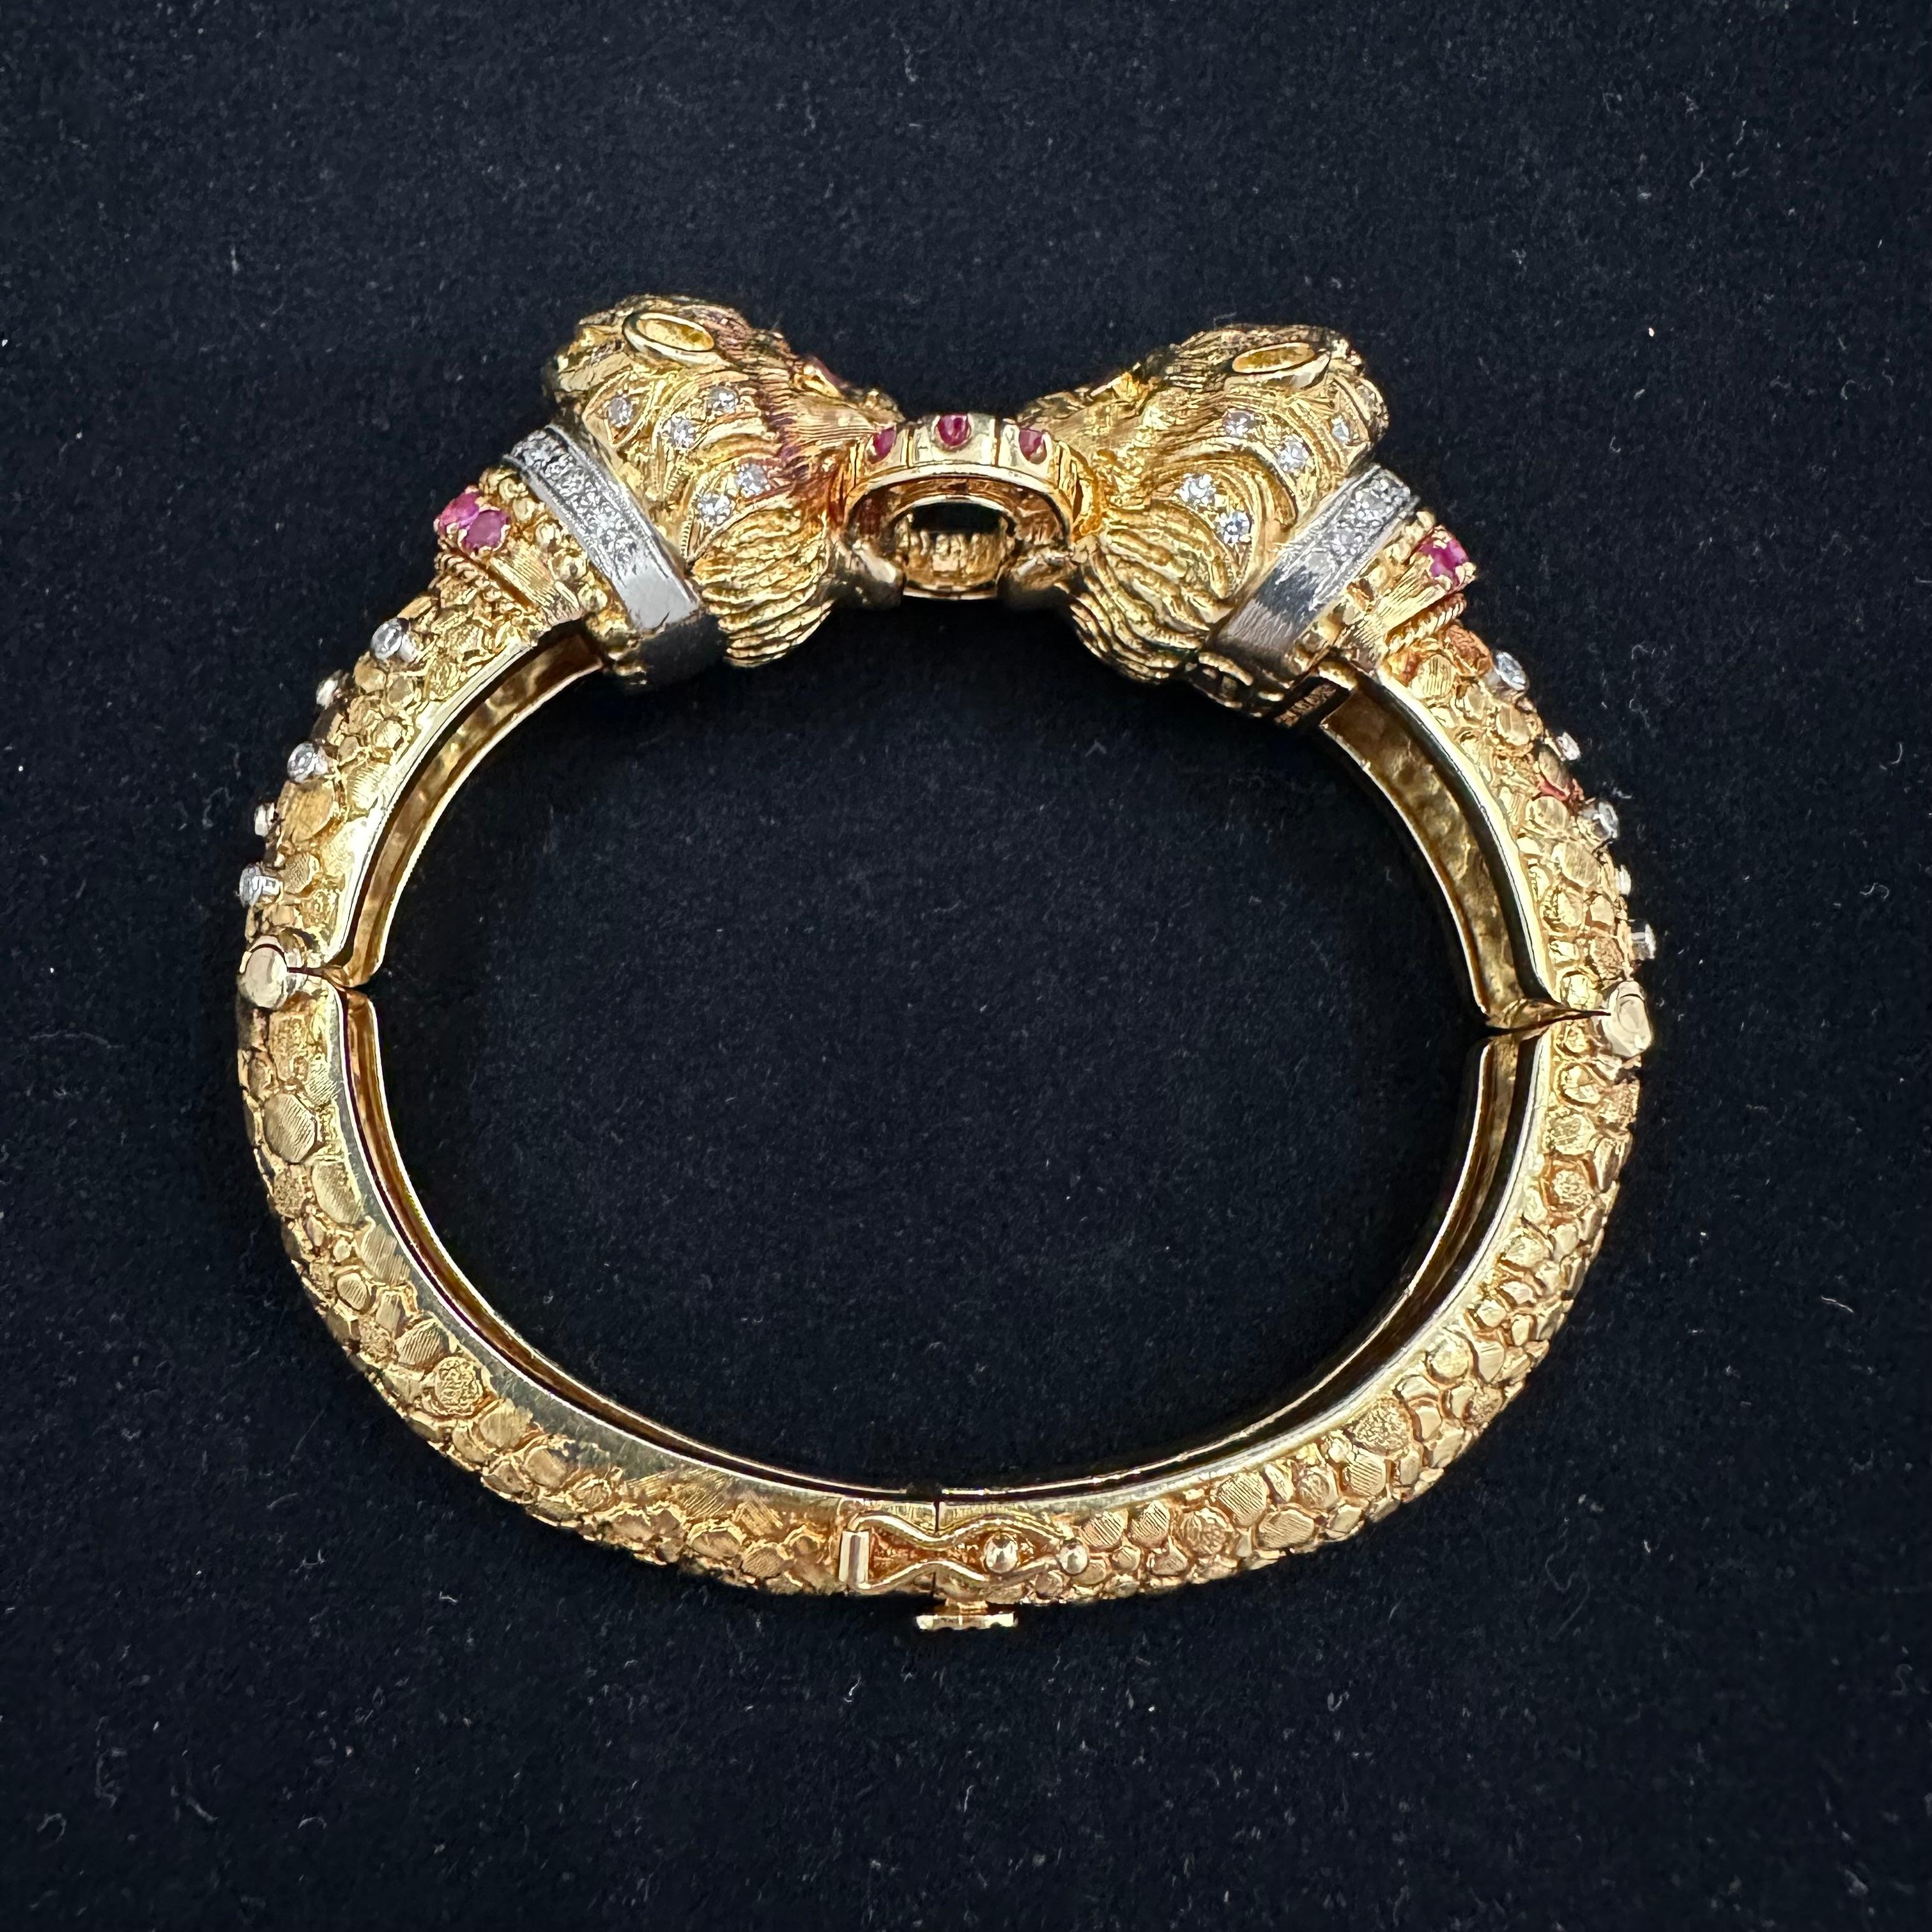 Ilias Lalaounis, jeweler, artist, and academician,
became world renowned for creating luxurious gold jewelry steeped in history
 
1960's Double Lion Head Bracelet.
18k Yellow Gold Hinged Bracelet  Encrusted with 89 Round Diamonds and 20 Red Rubies.